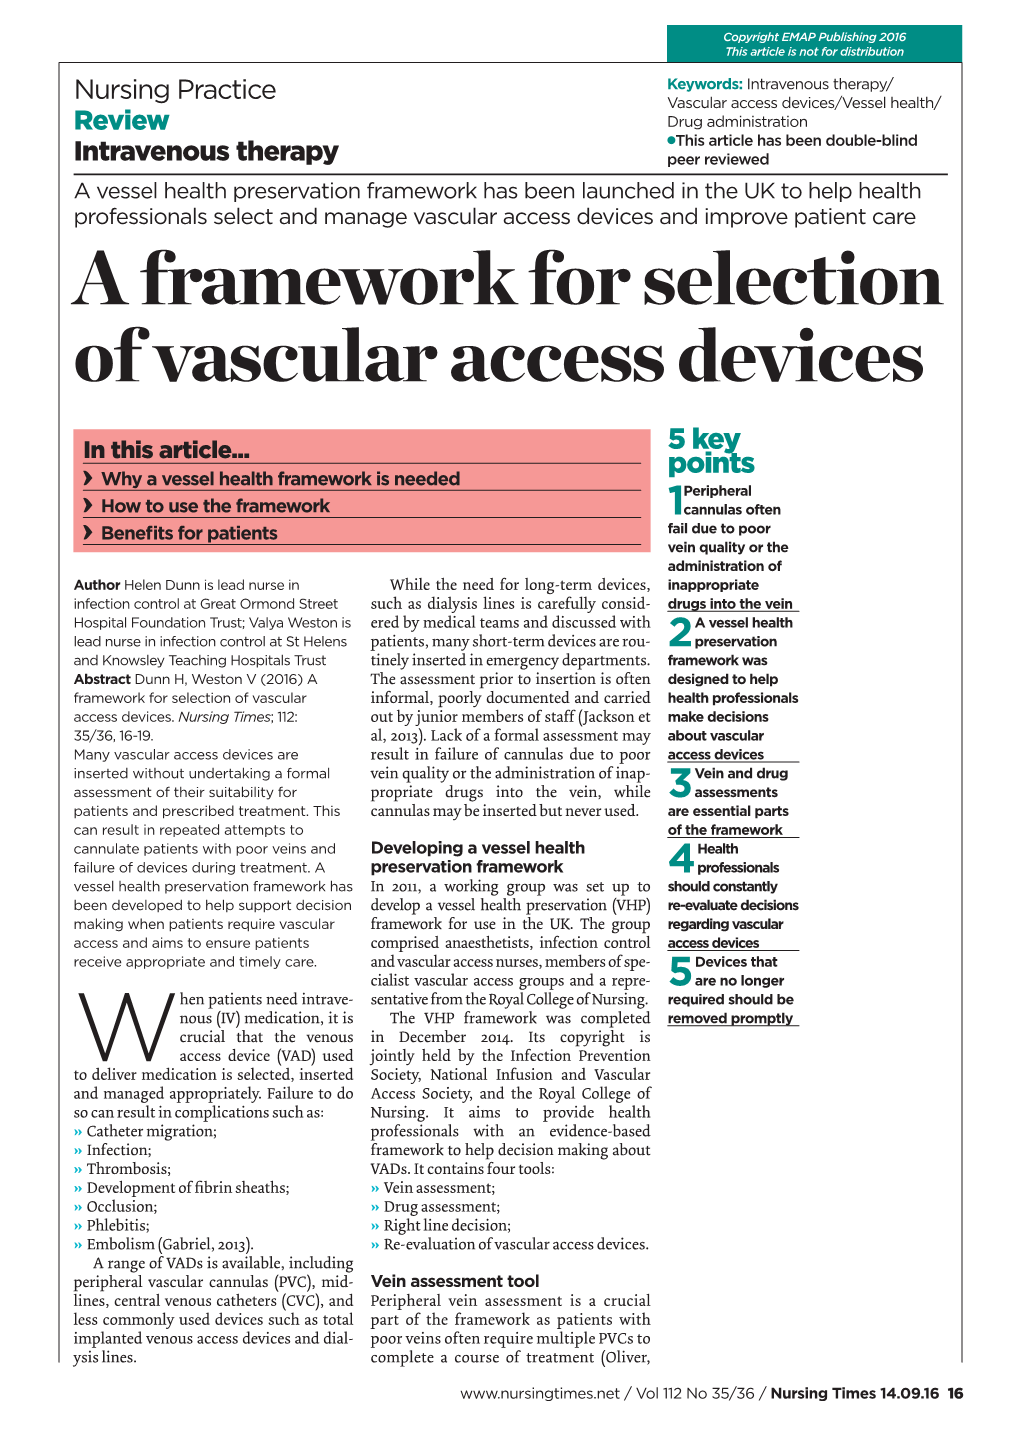 A Framework for Selection of Vascular Access Devices